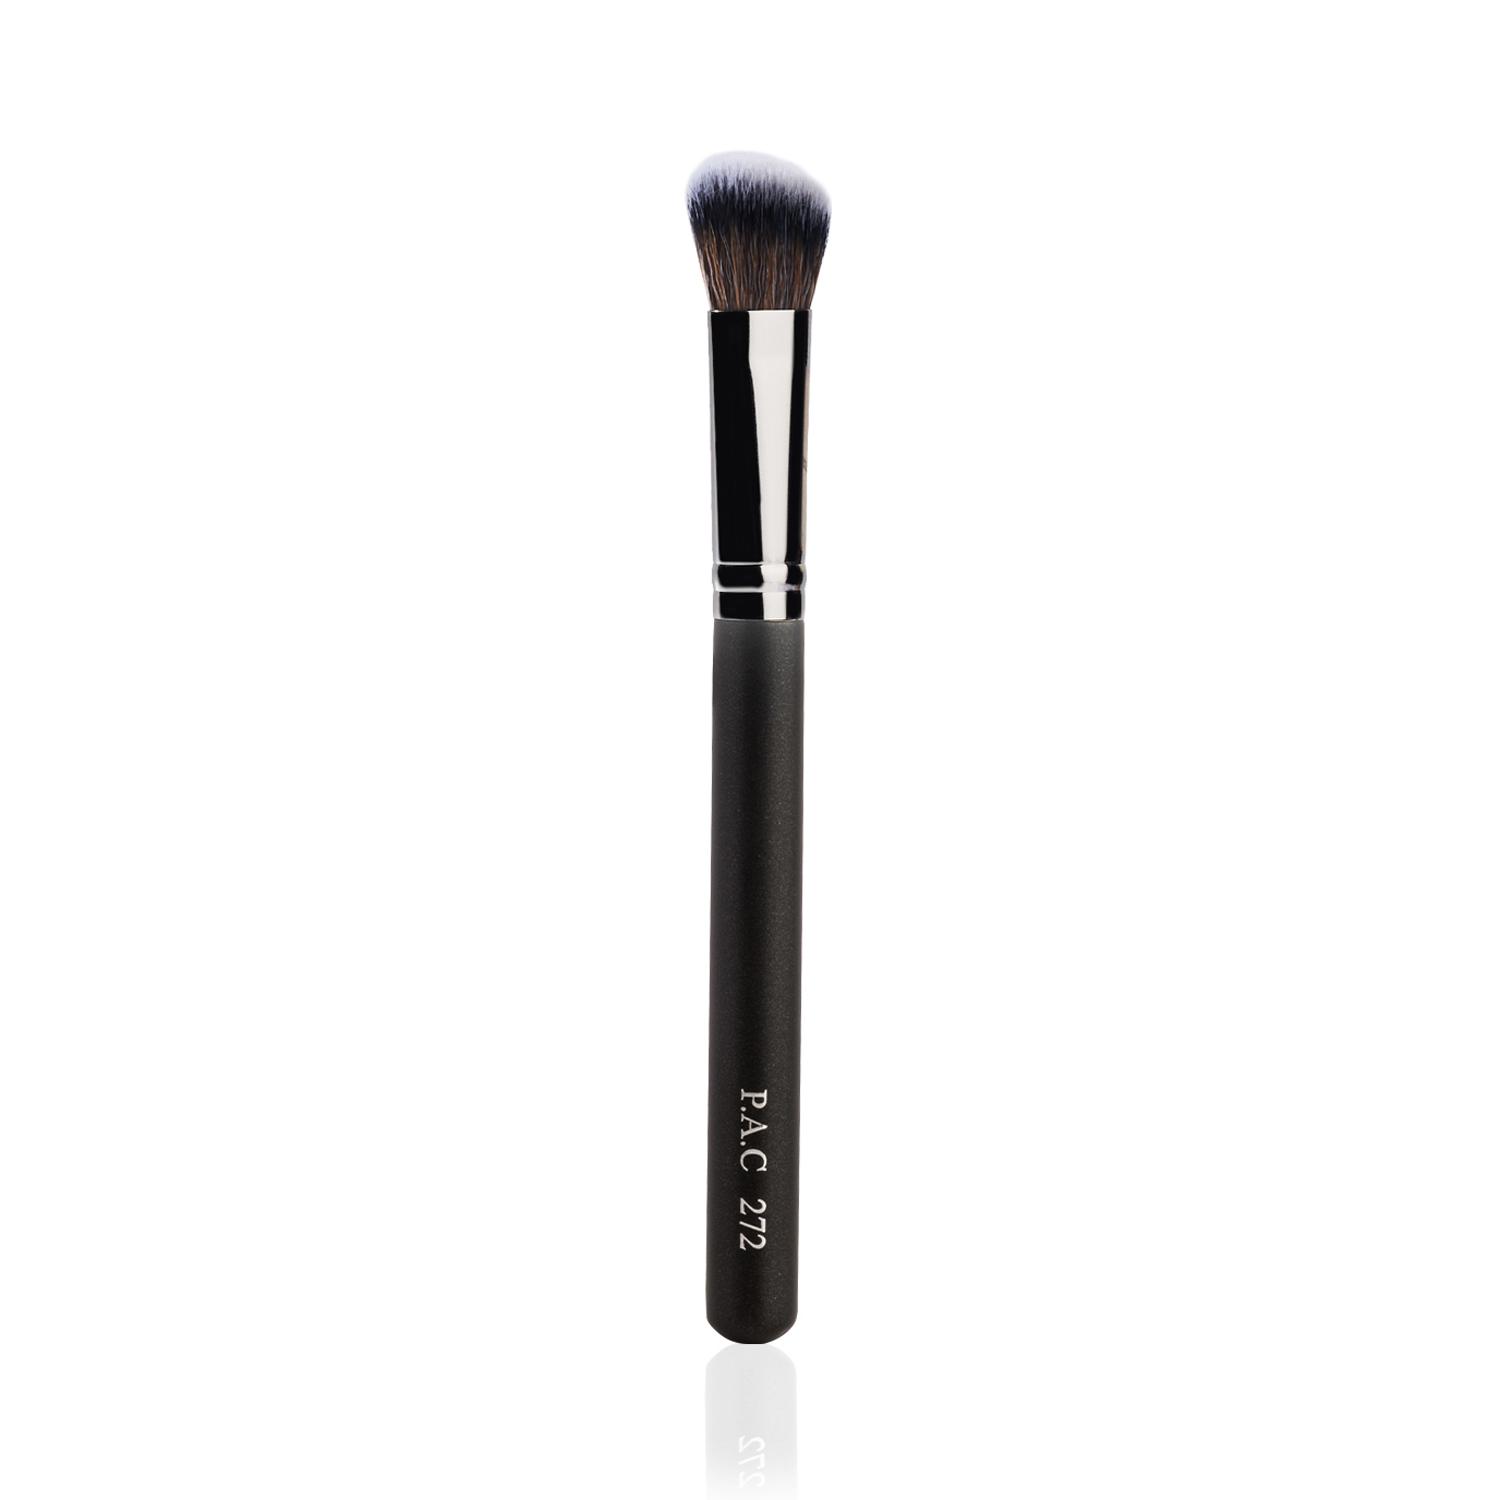 PAC | PAC Concealer Brush - 272 (1Pc)